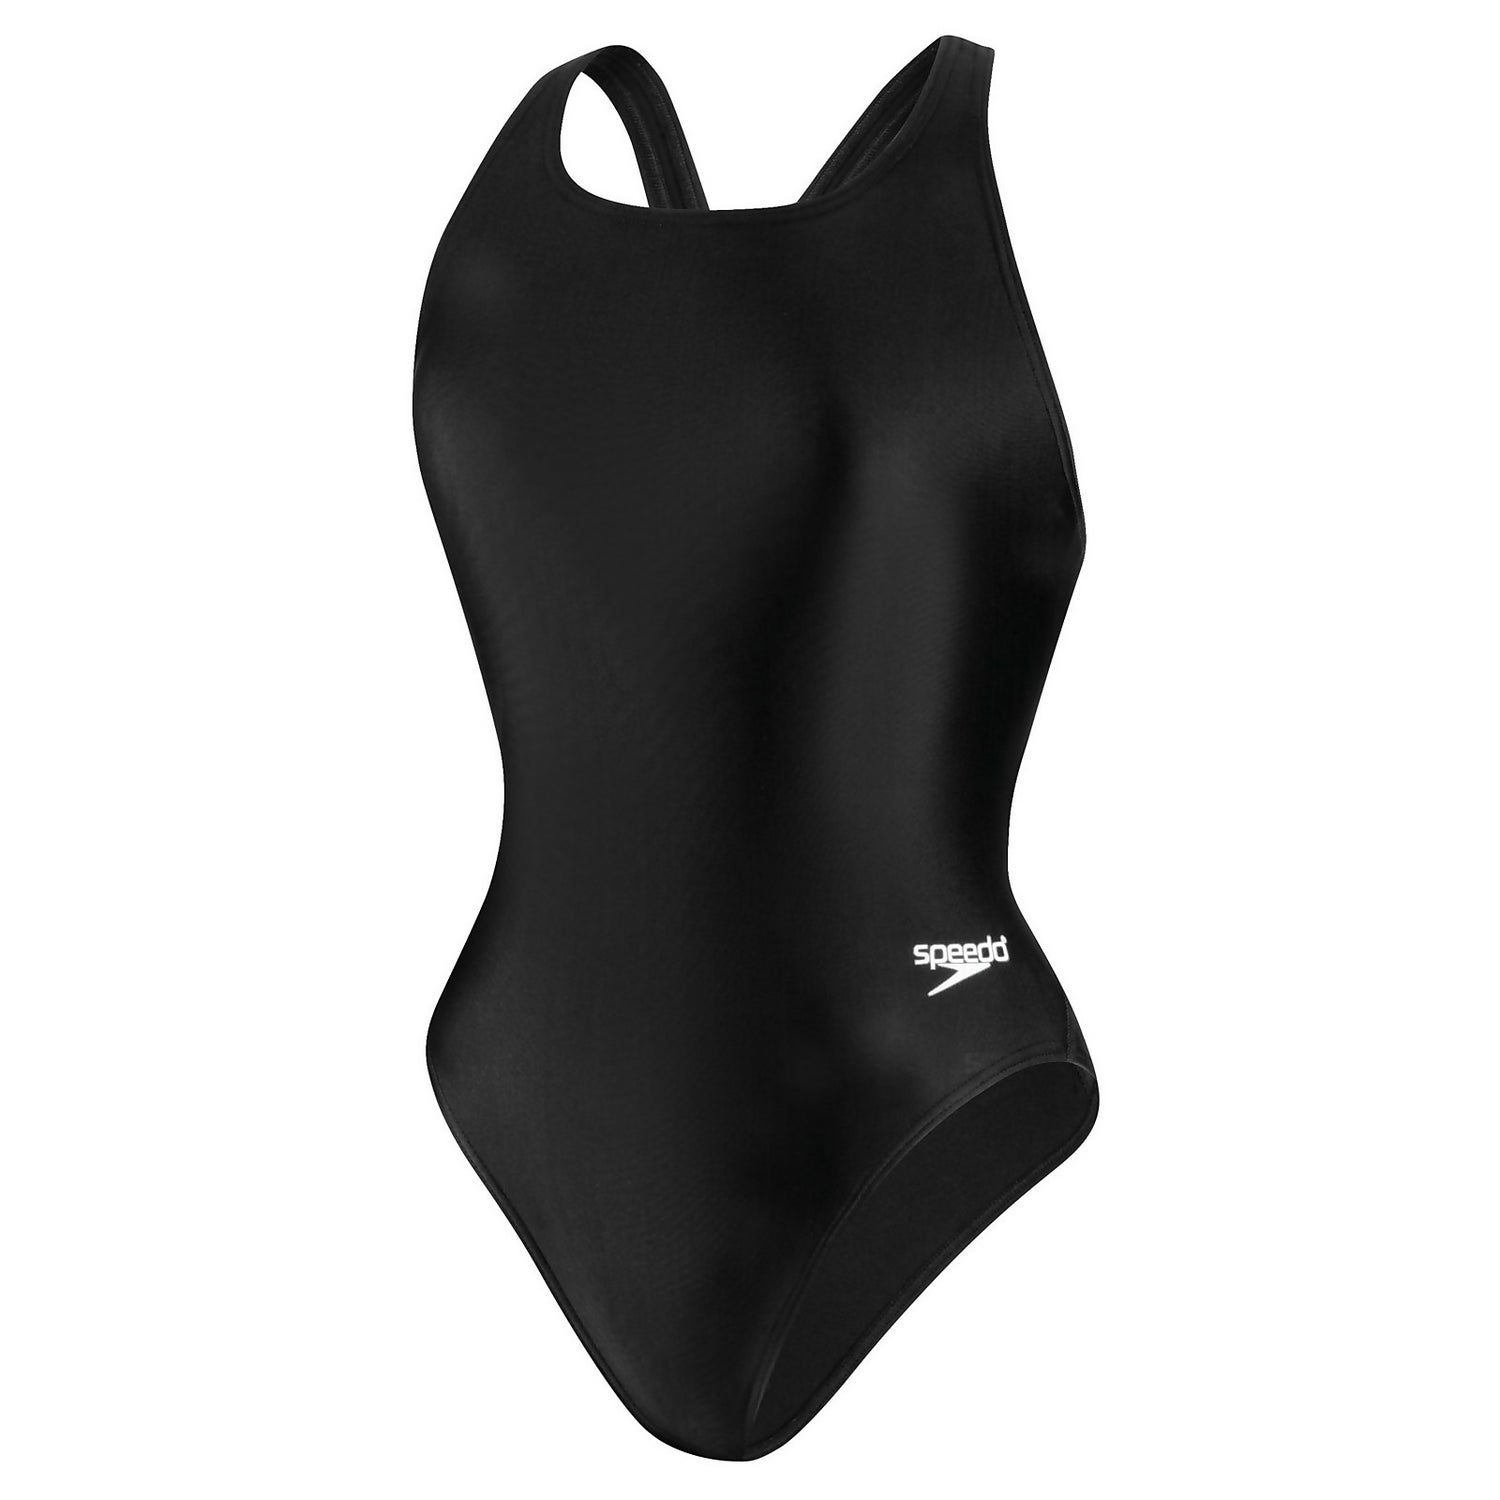 New Speedo Girls Swimsuit One Piece Prolt Super Pro Solid Youth Sm